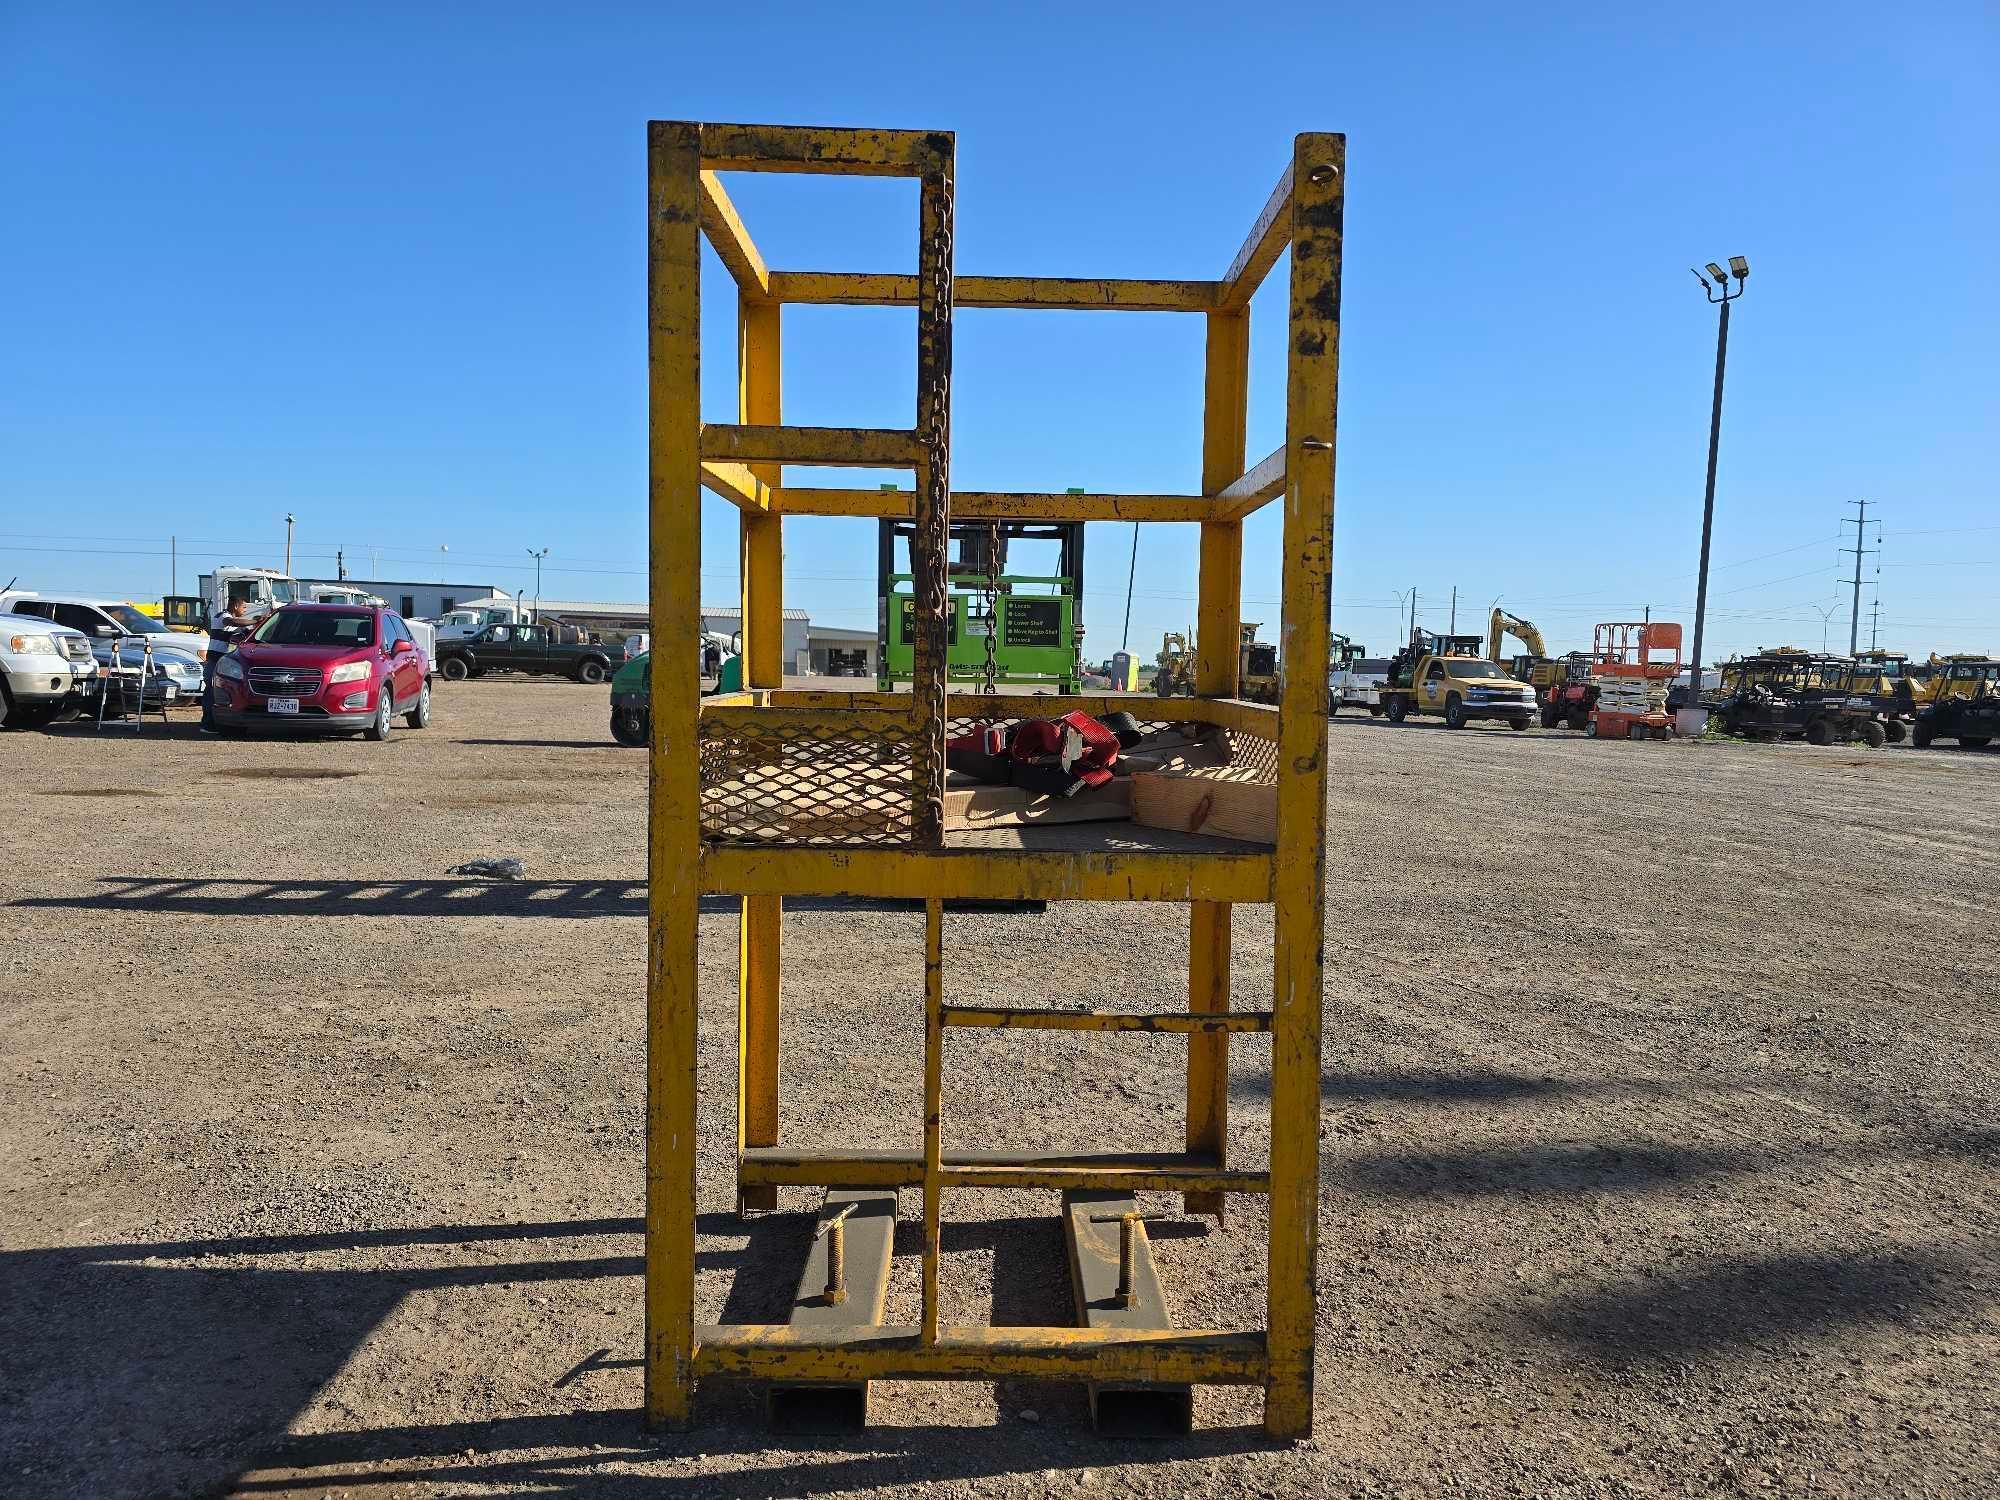 Raised Forklift Safety Man Cage